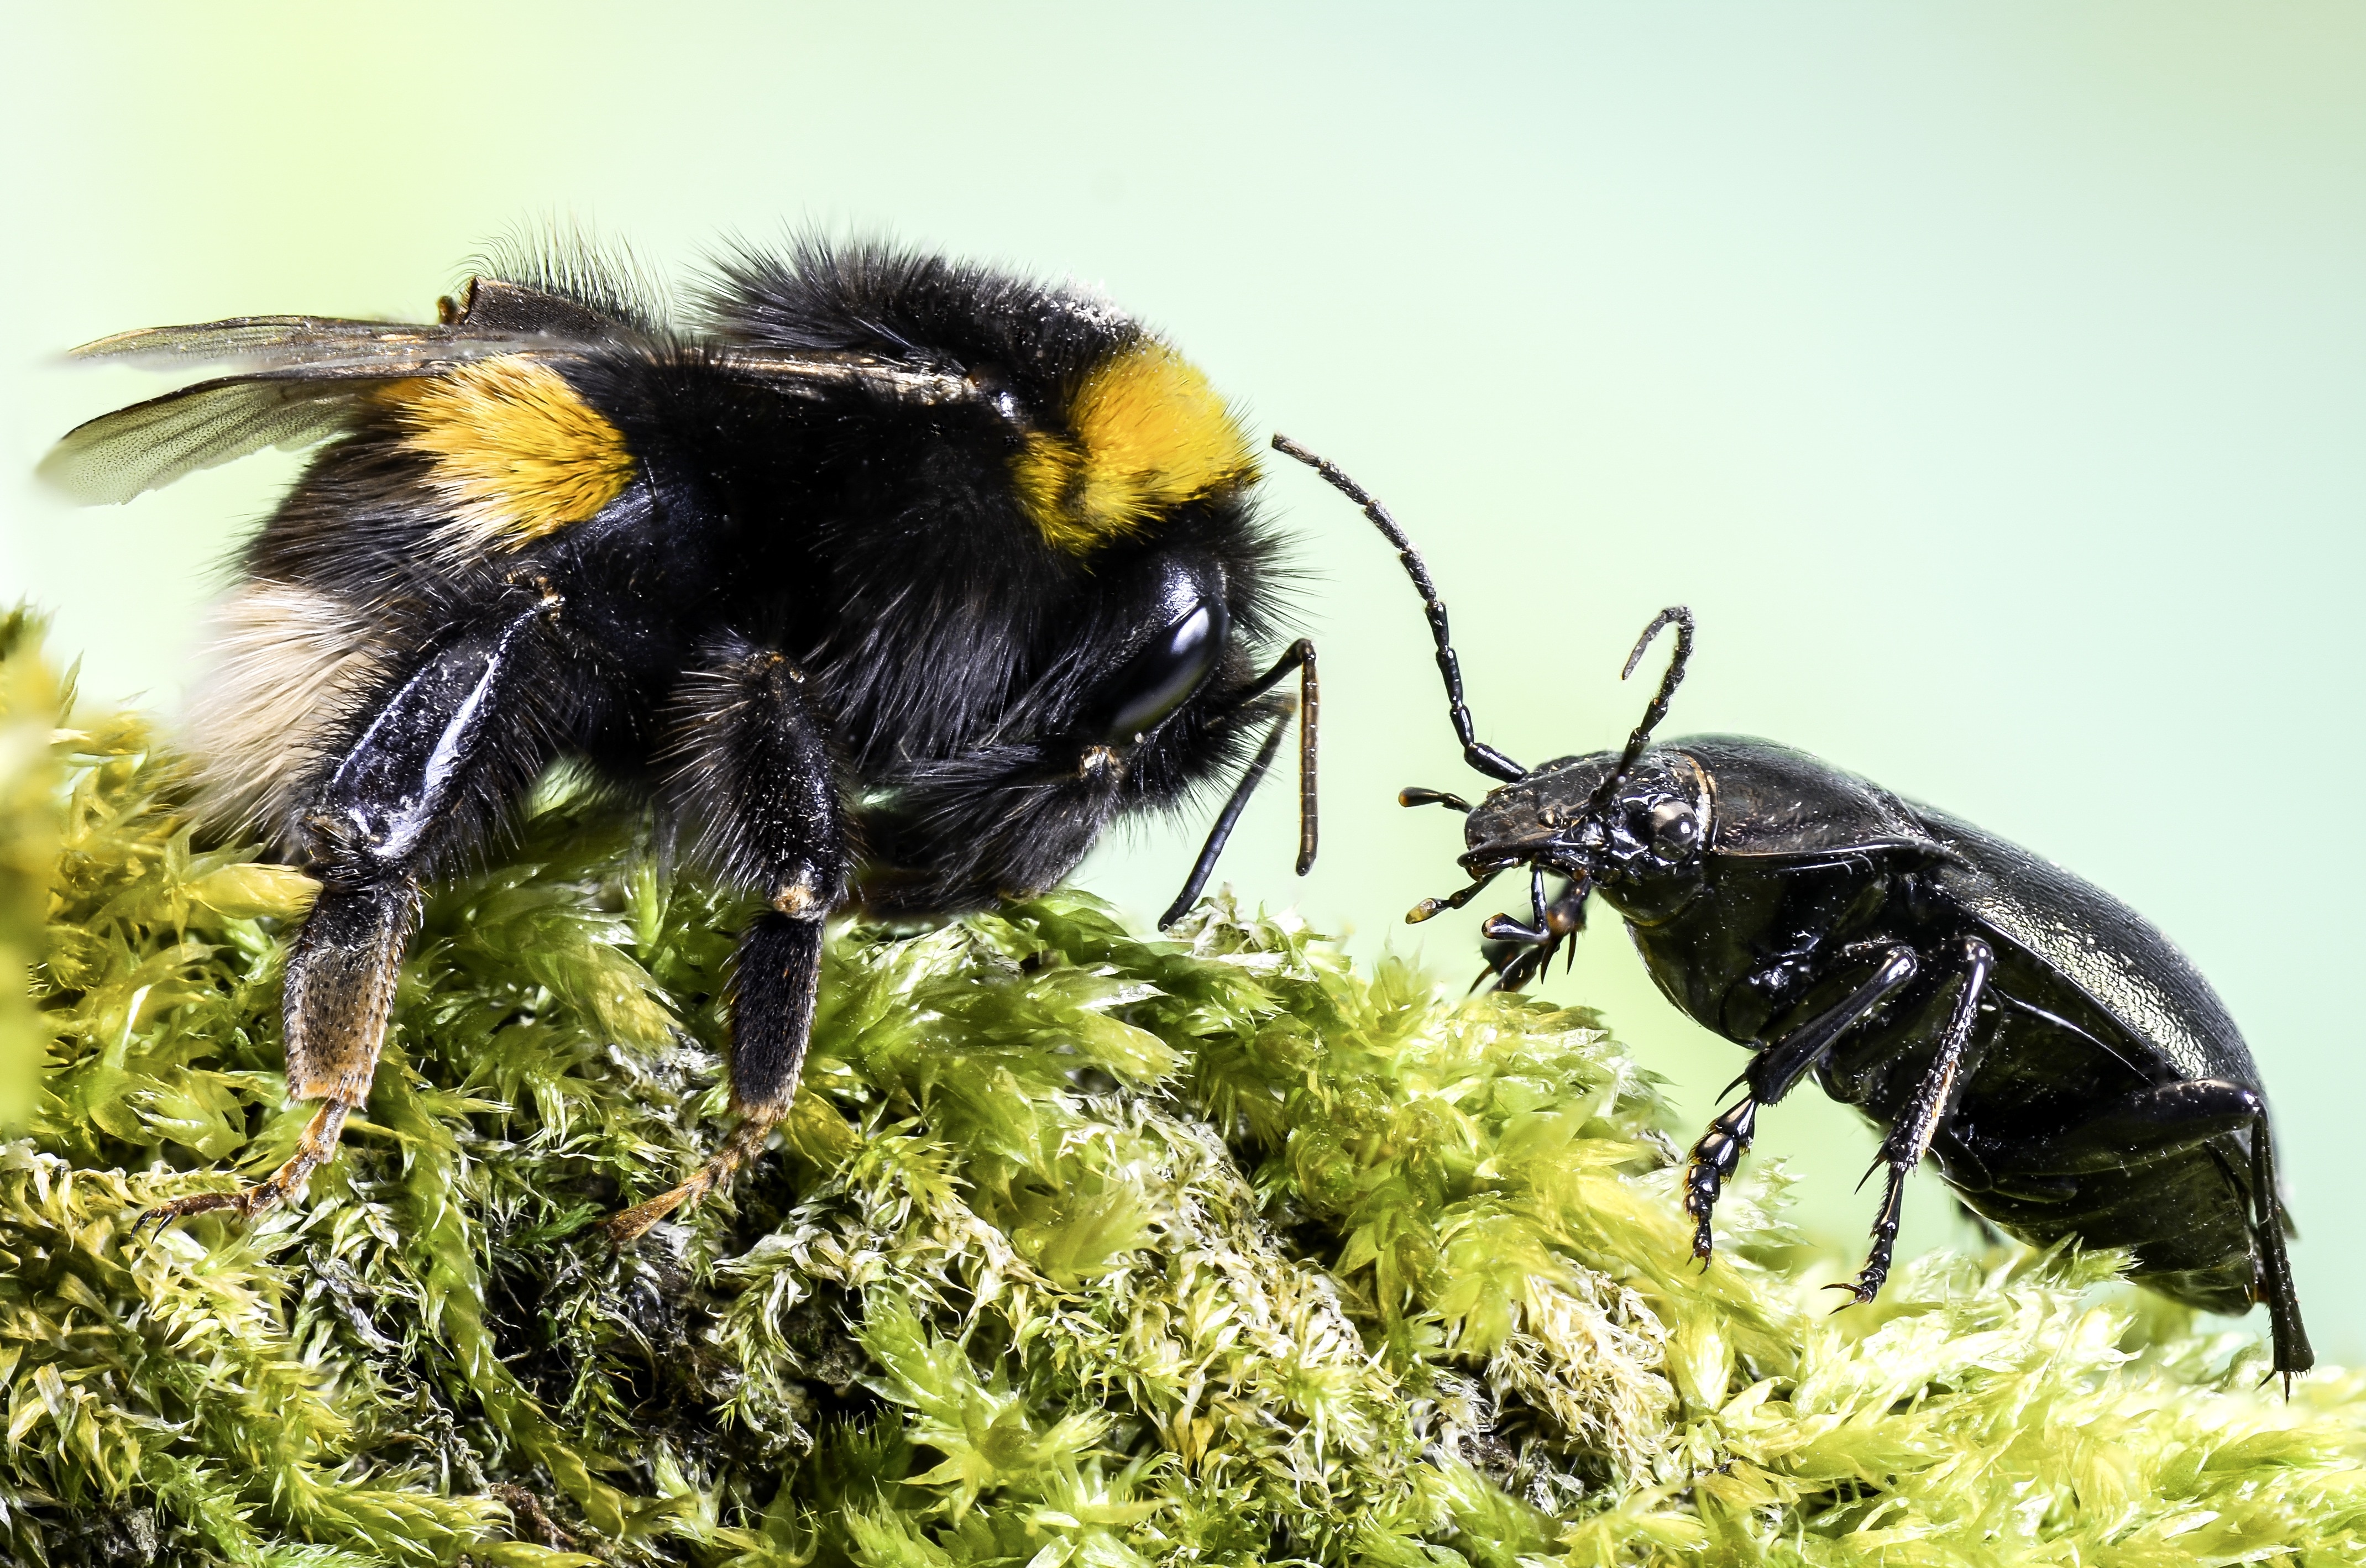 black honeybee and black insect